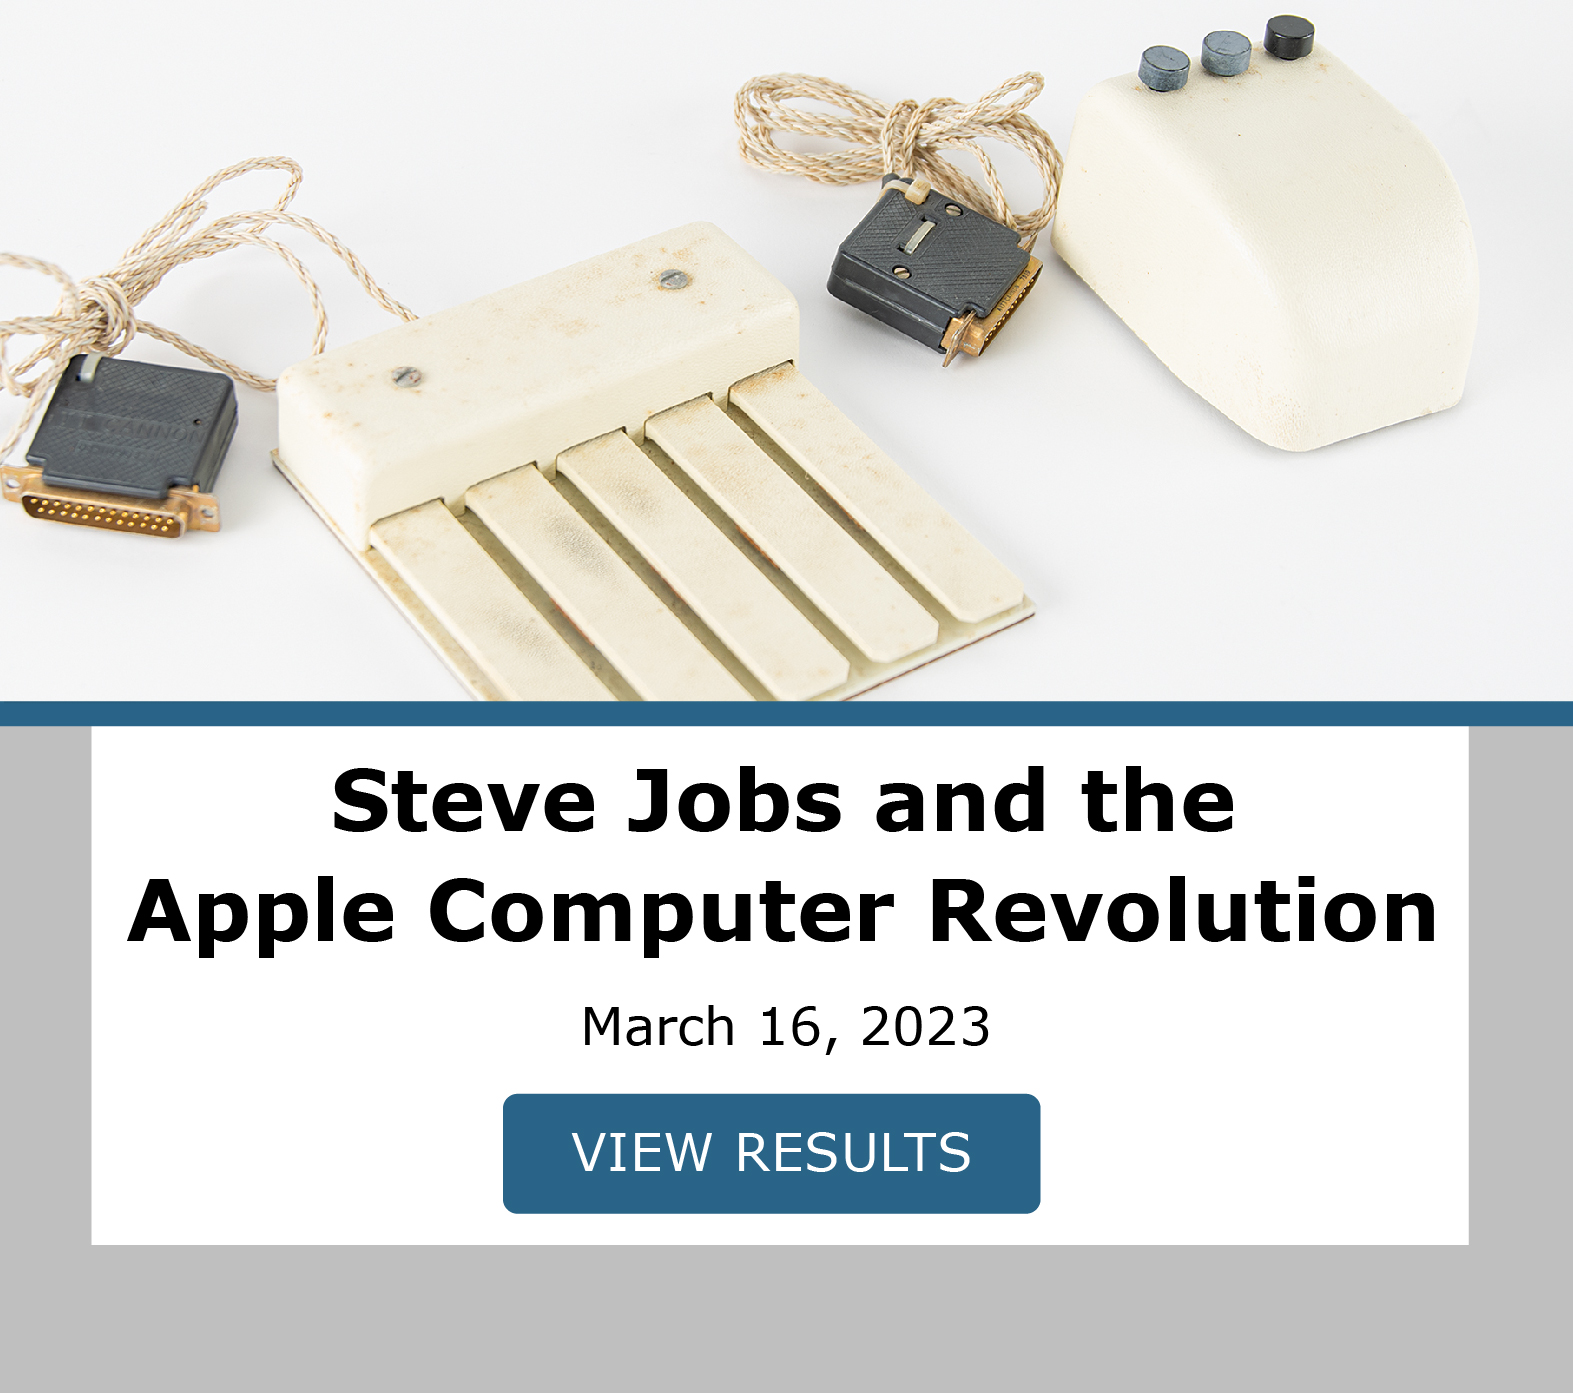 Steve Jobs and the Apple Computer Revolution. Bidding Closes March 16, 2023. View Results!